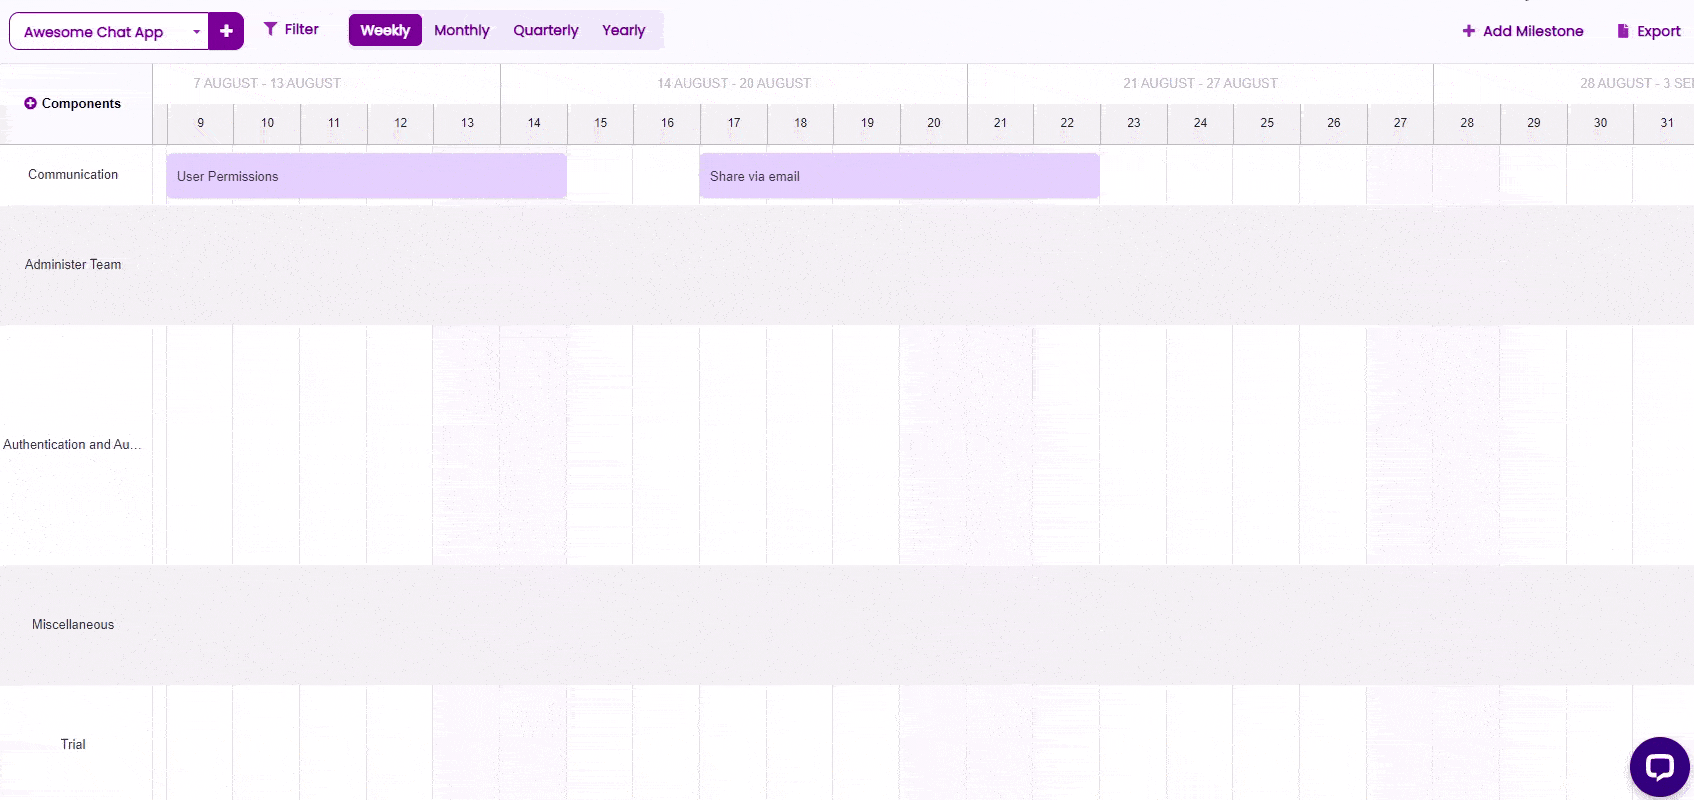 Add timelines to your features easily using the timeline tool.